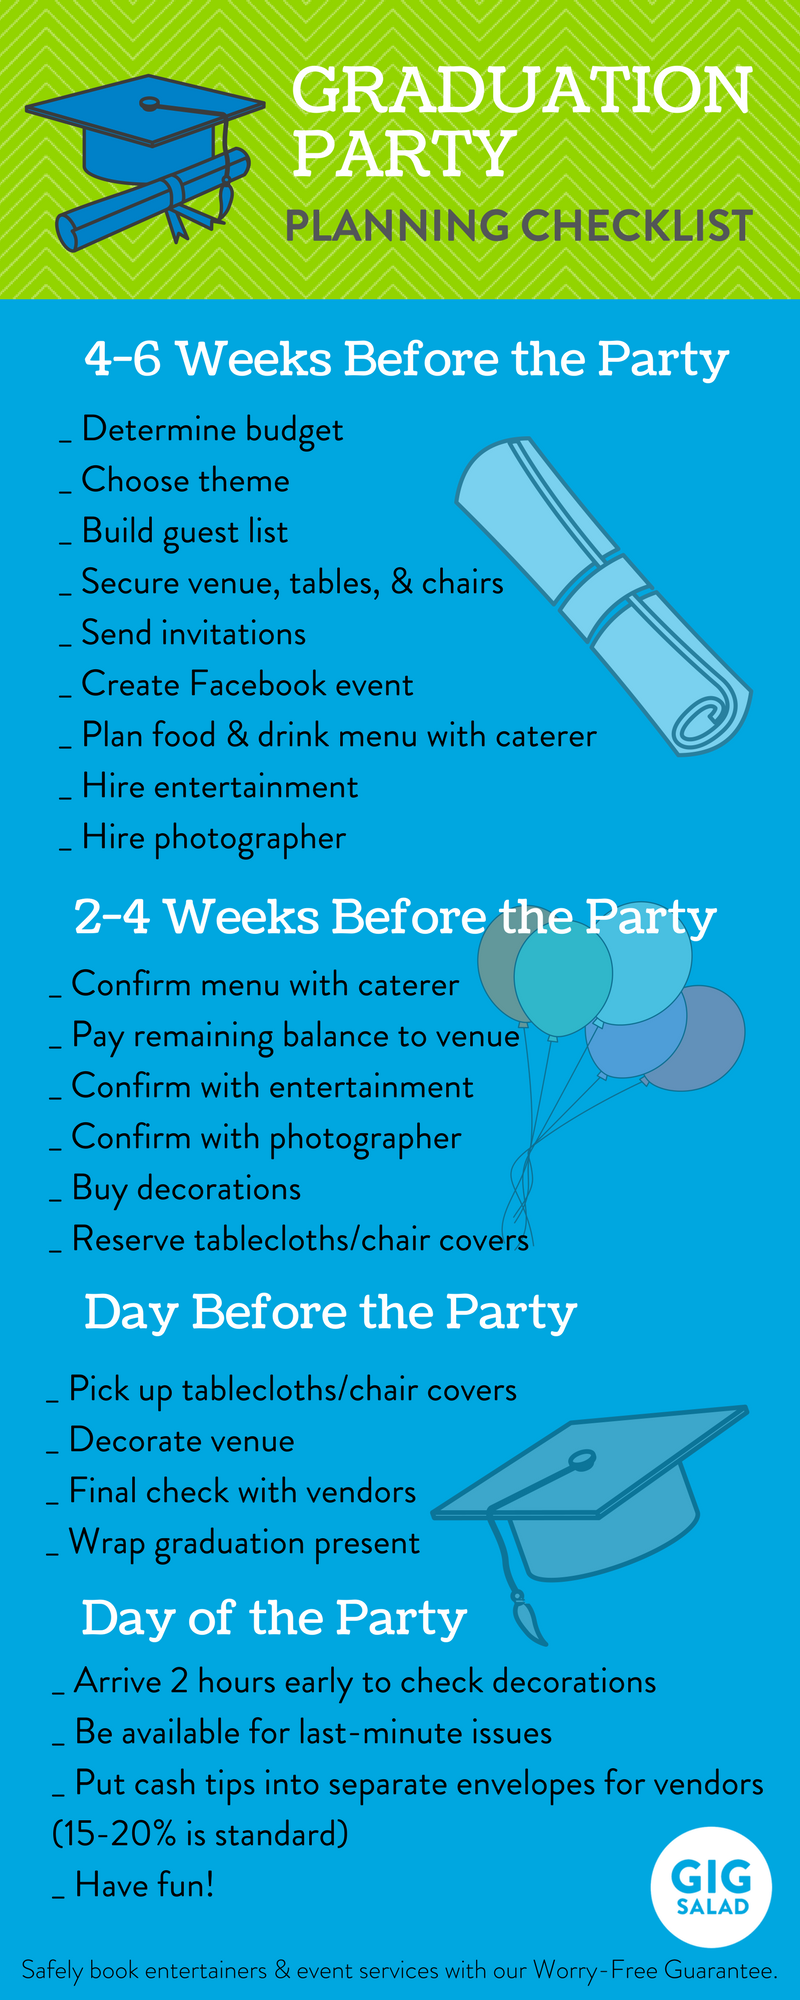 A Simple Graduation Party Checklist For Parents The GigSalad Community